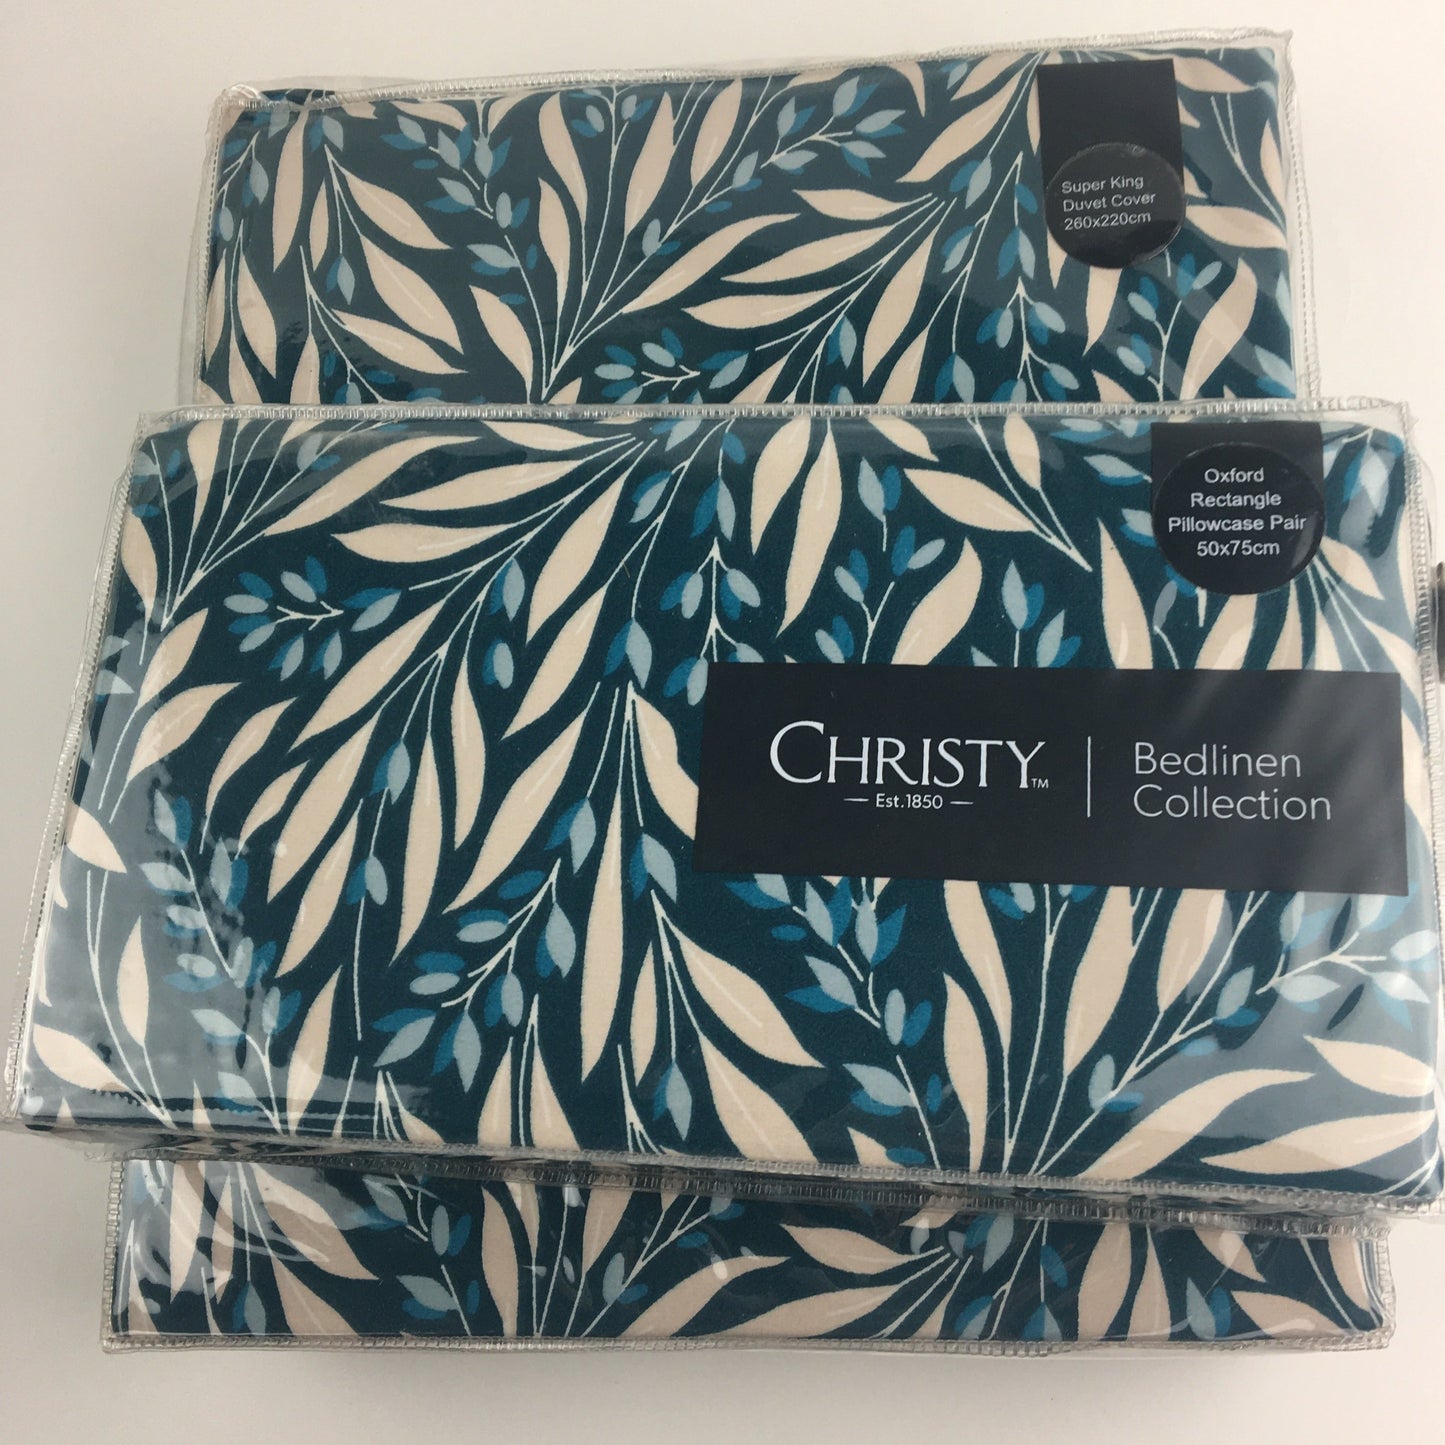 Elouise Duvet Cover by Christy